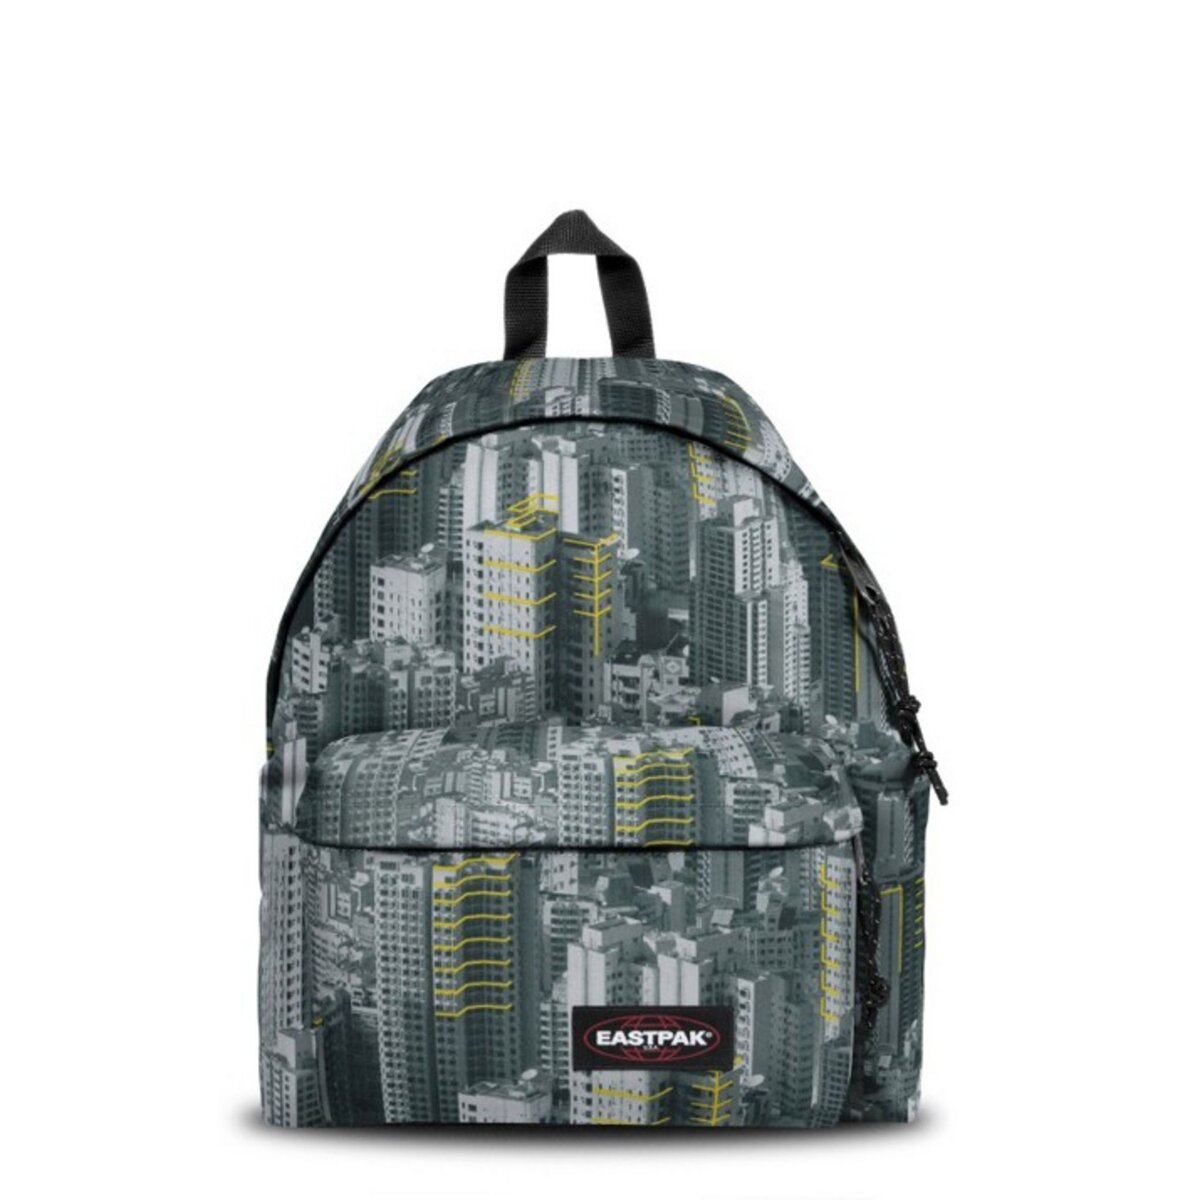 EASTPAK Sac à dos PADDED PAK'R urban yellow multicolore 1 compartiment